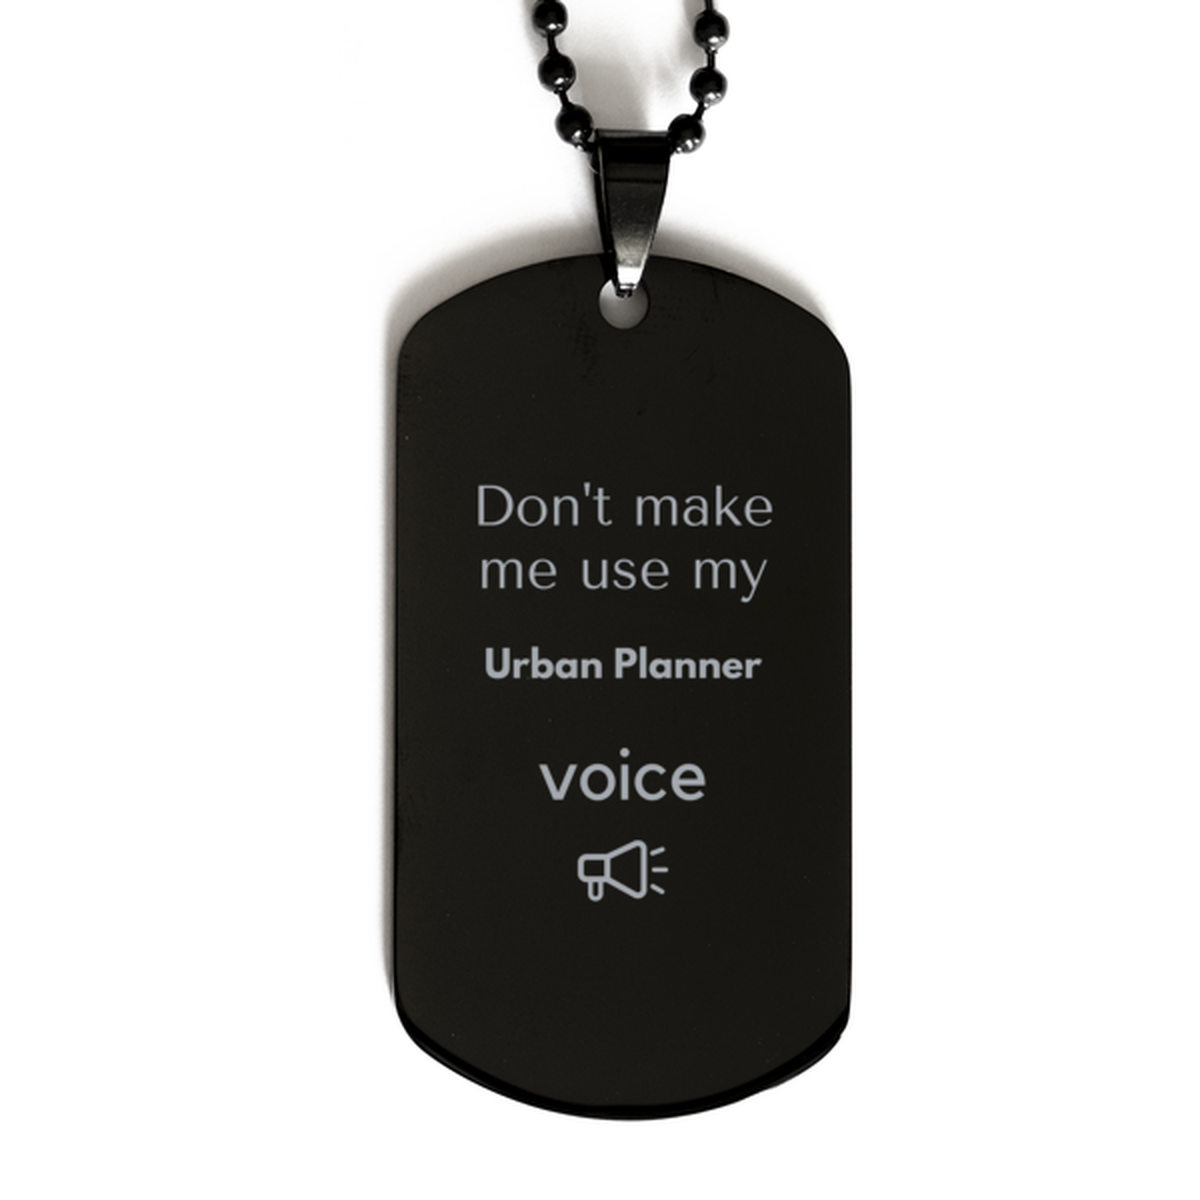 Don't make me use my Urban Planner voice, Sarcasm Urban Planner Gifts, Christmas Urban Planner Black Dog Tag Birthday Unique Gifts For Urban Planner Coworkers, Men, Women, Colleague, Friends